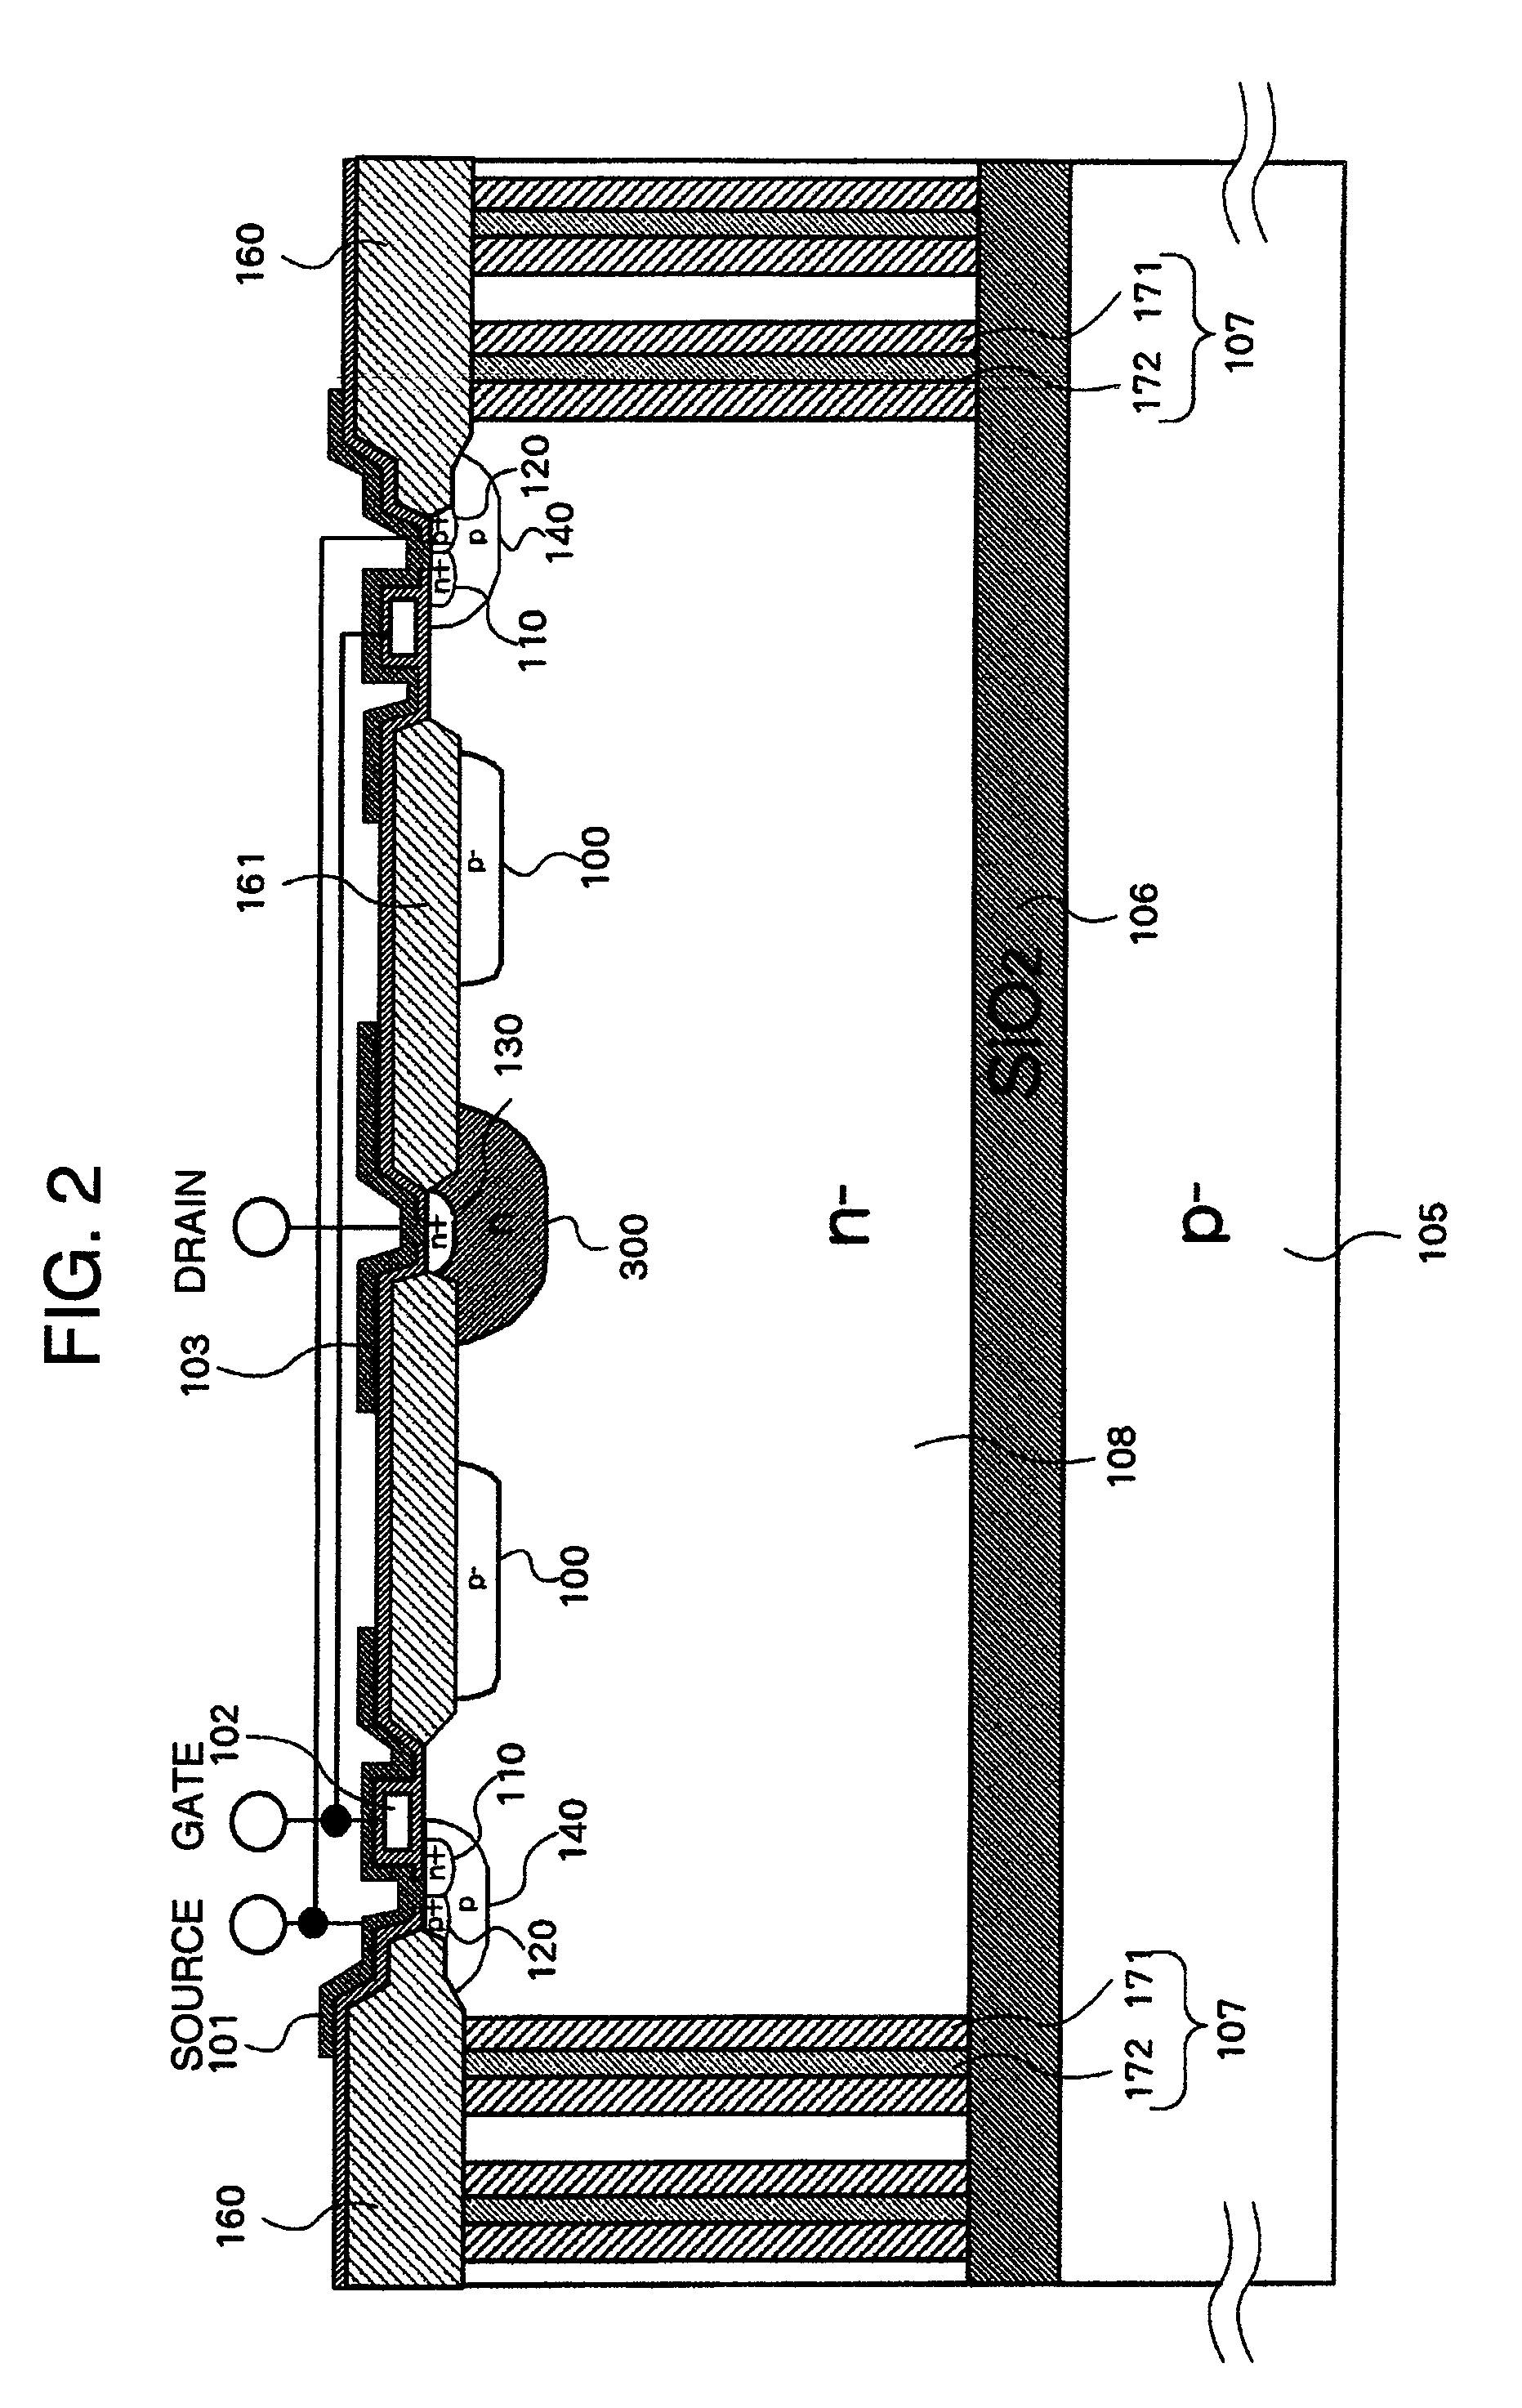 High breakdown voltage semiconductor circuit device